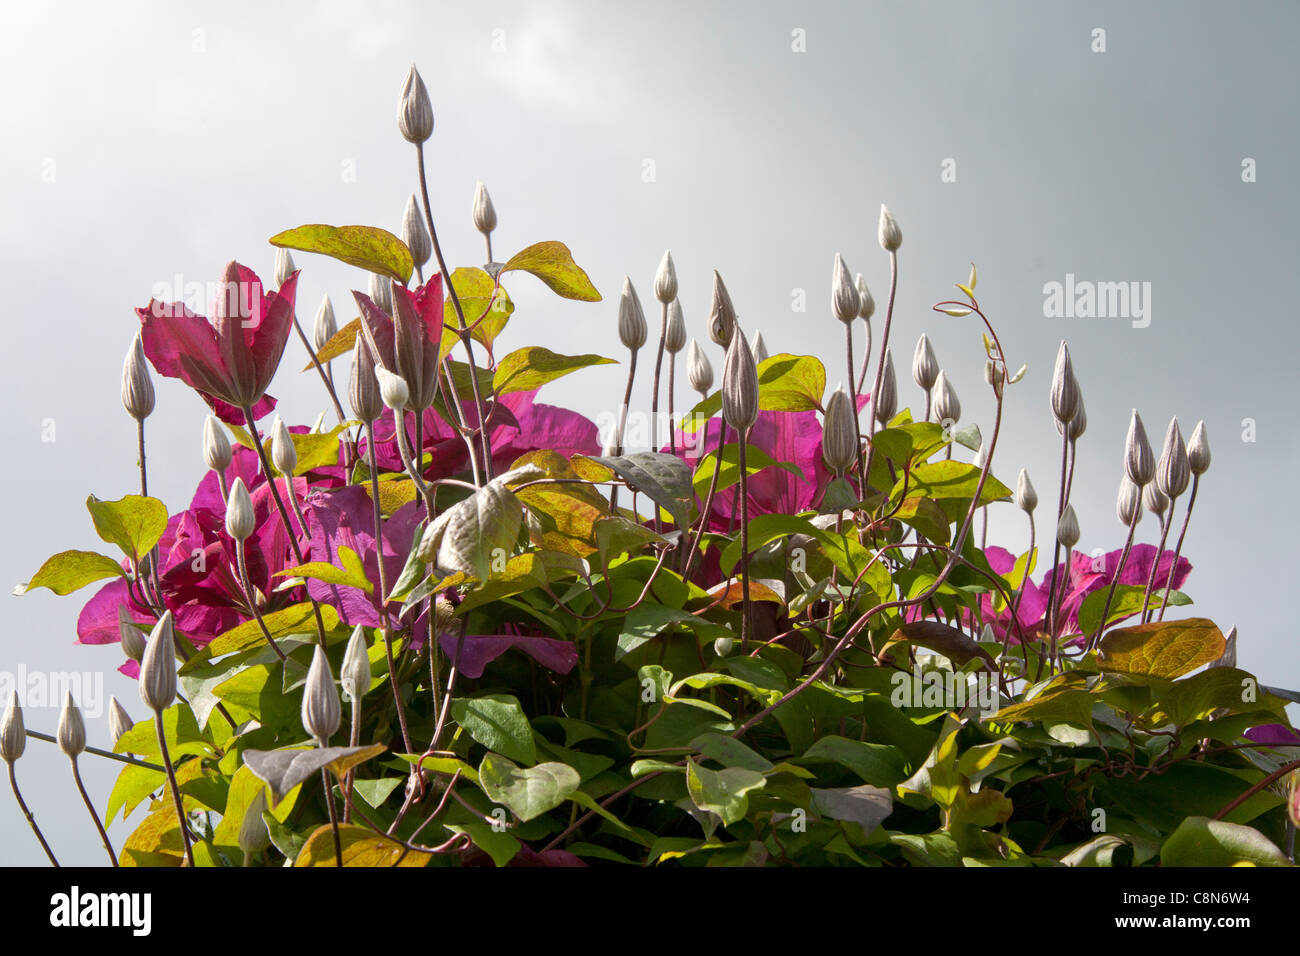 Detail of clematis flowers and buds appearing to reach up to a grey sky Stock Photo